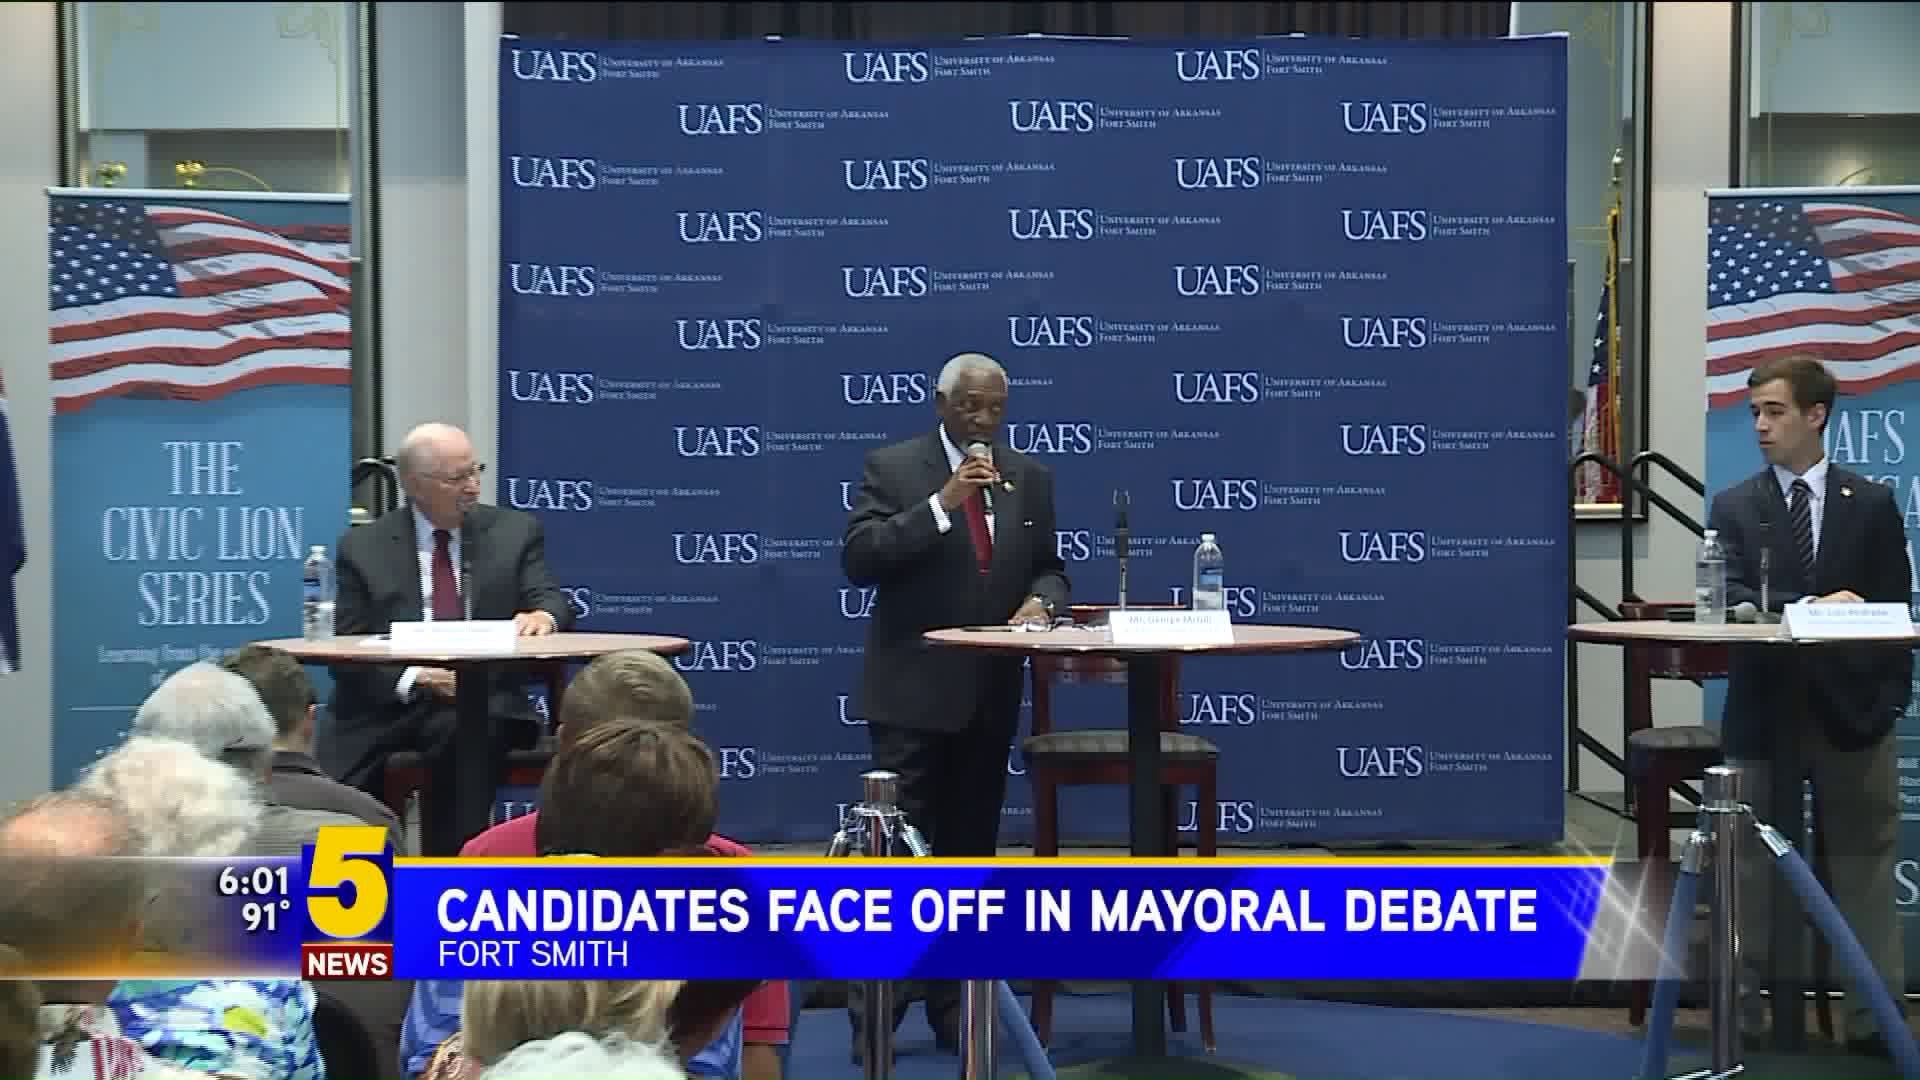 Fort Smith Mayor Candidates Debate At UAFS